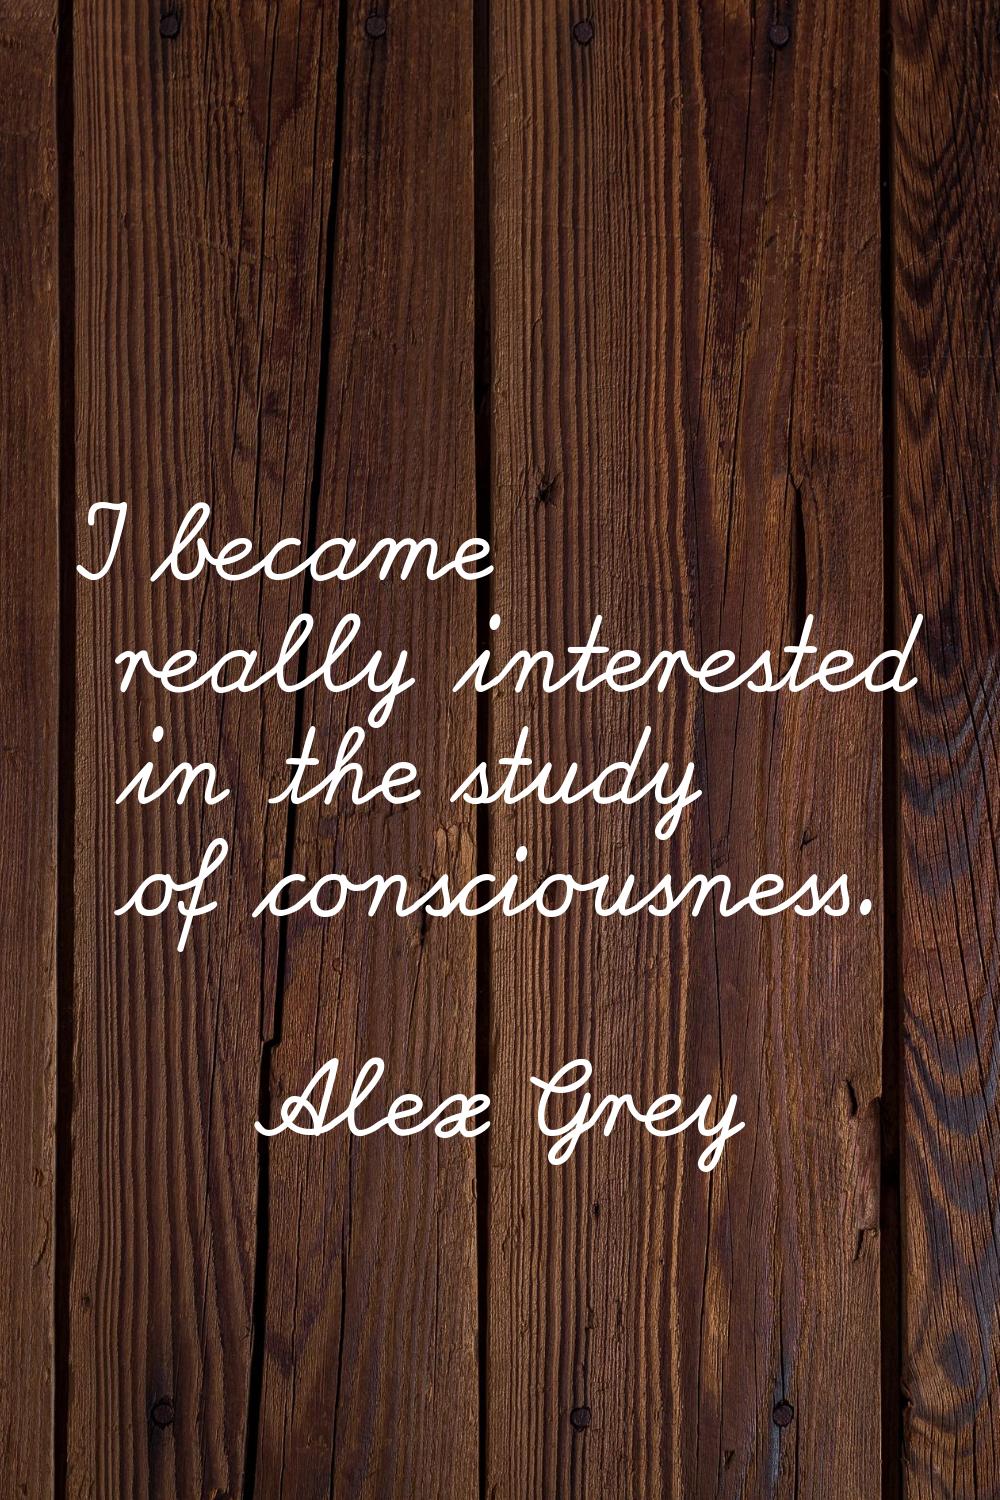 I became really interested in the study of consciousness.